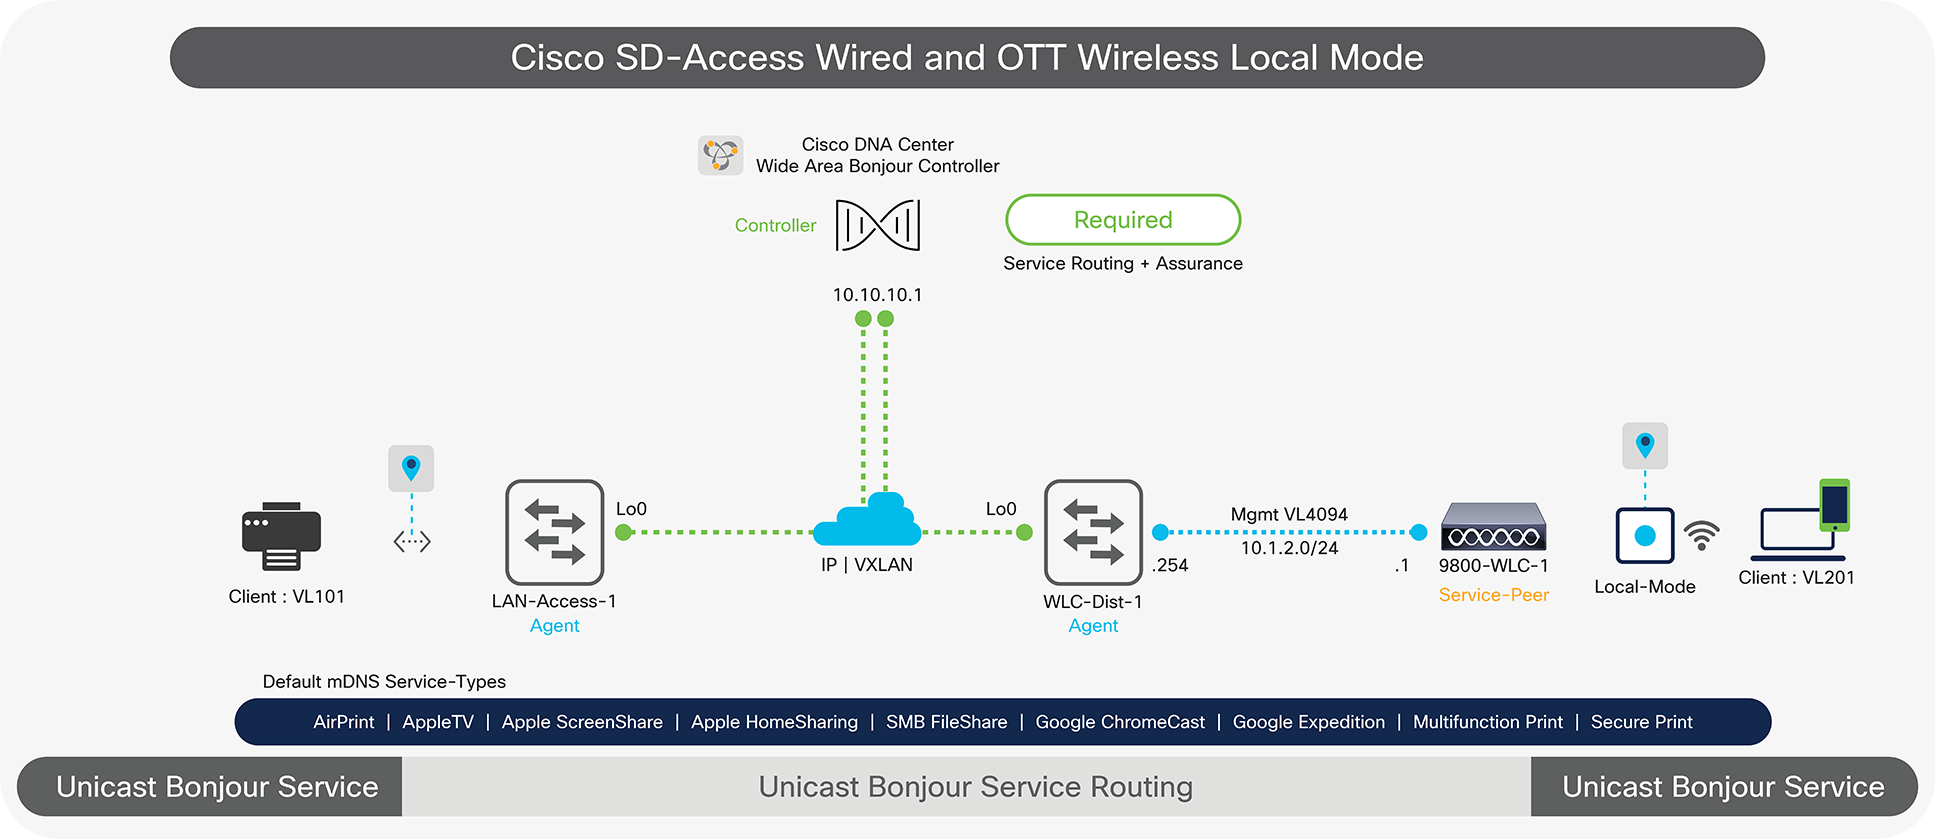 Wide Area Bonjour for Cisco SD-Access Wired and OTT Wireless